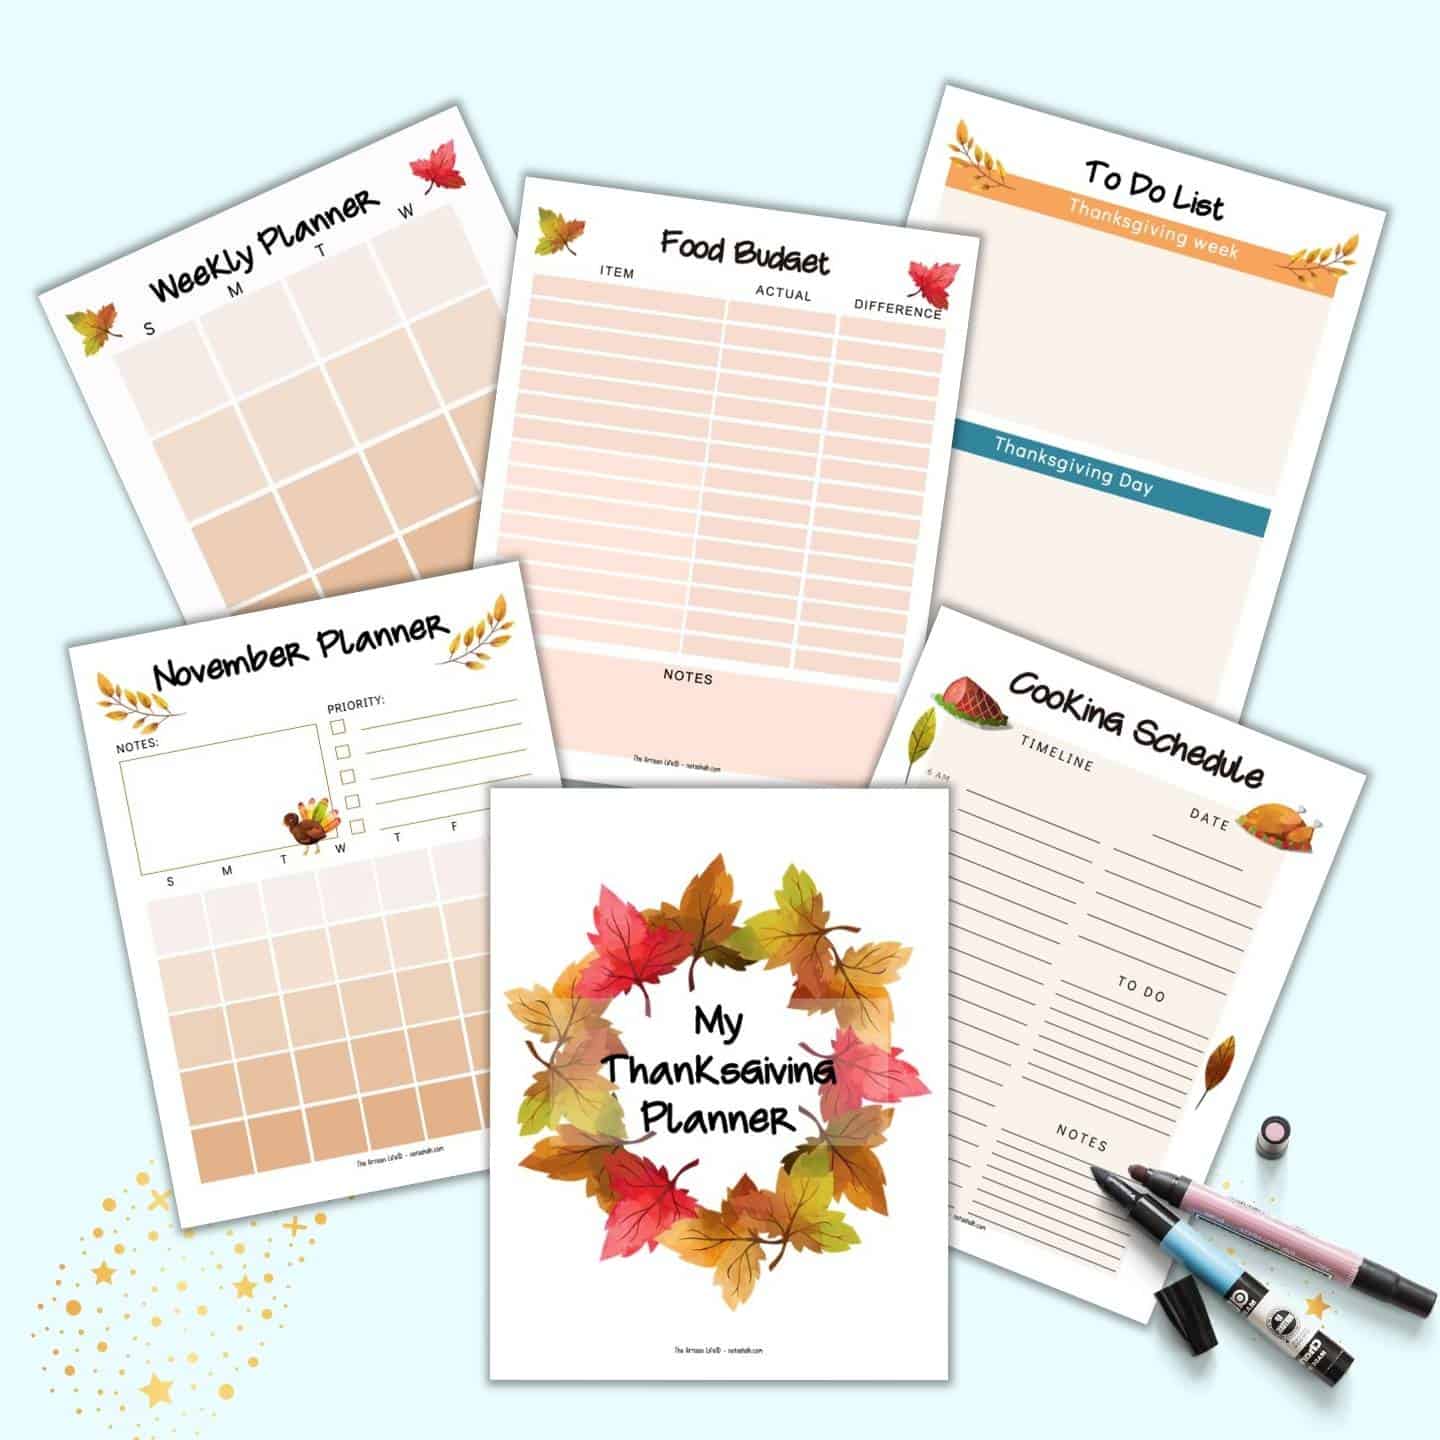 300+ Free Planner Printables to Organize Your Whole Life!